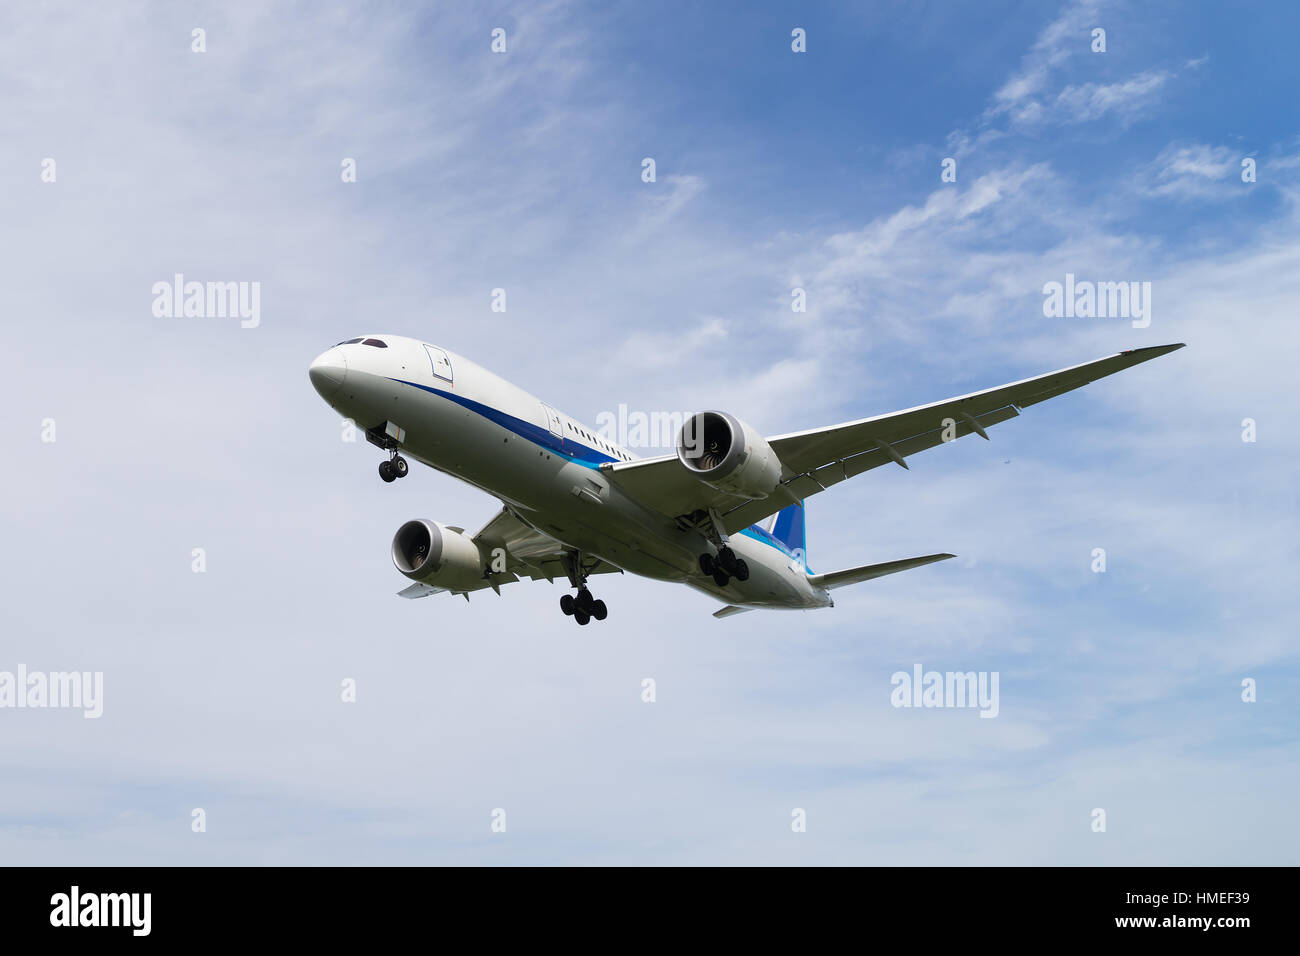 Boeing 787-8 landing to the airport. Stock Photo